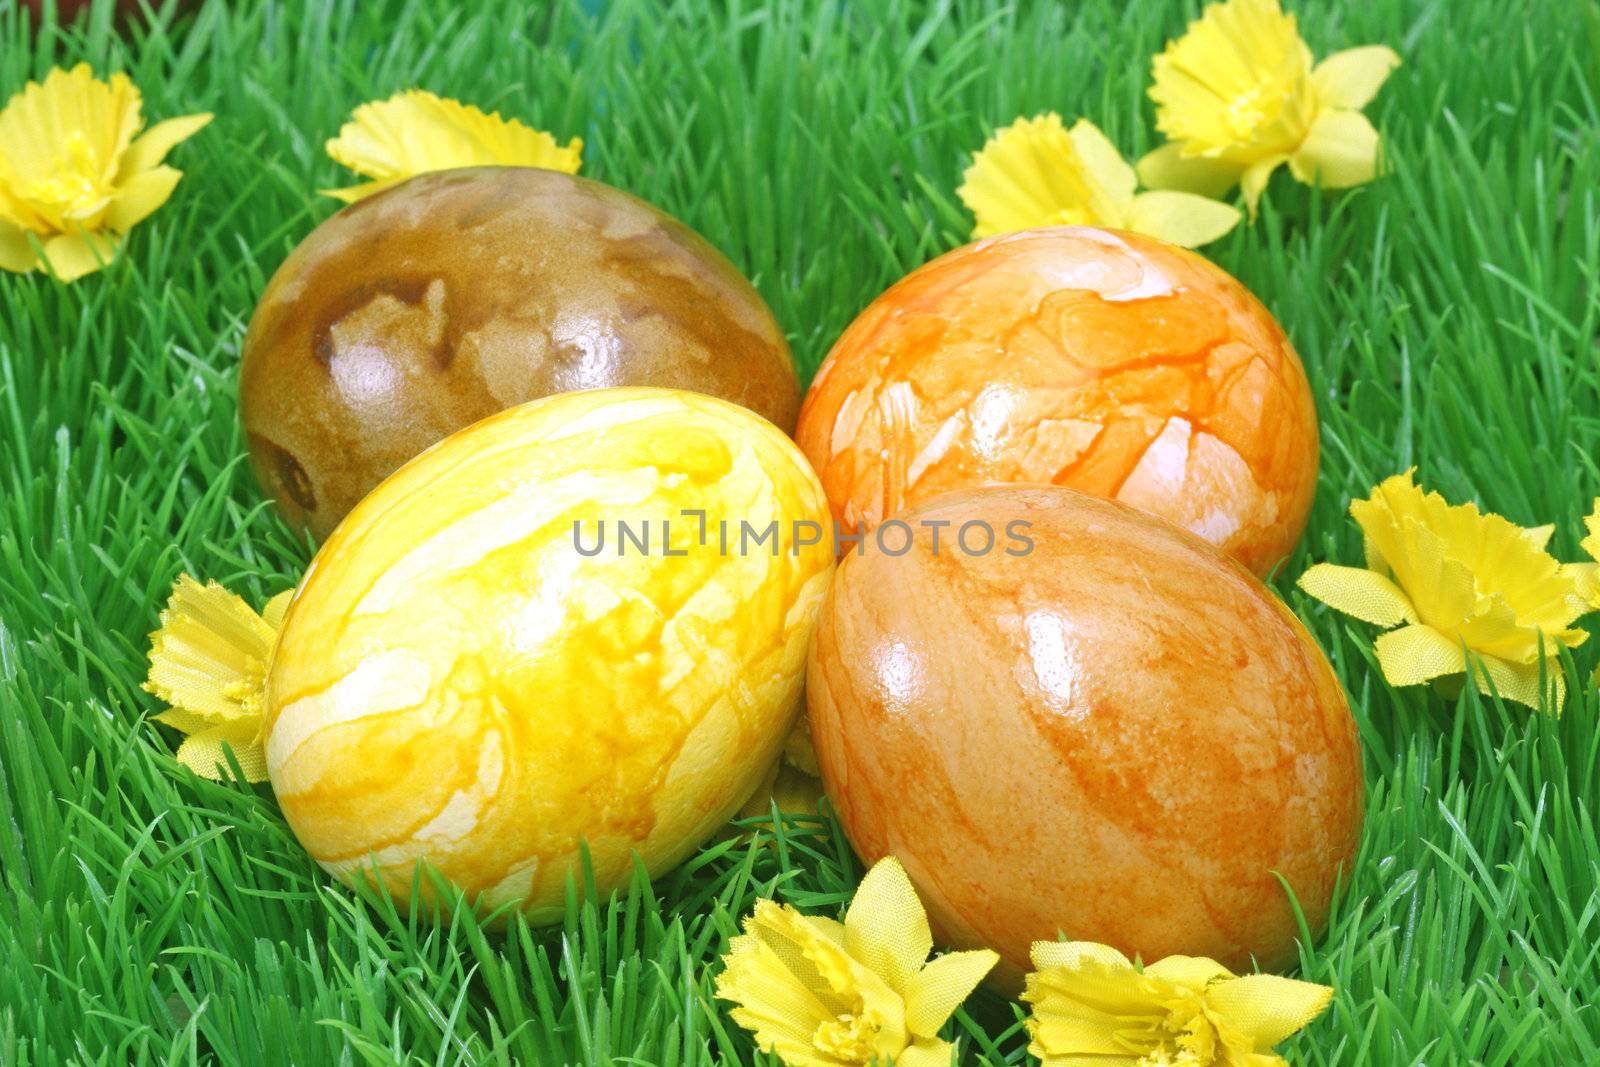 Four coloured easter eggs on grass with flowers